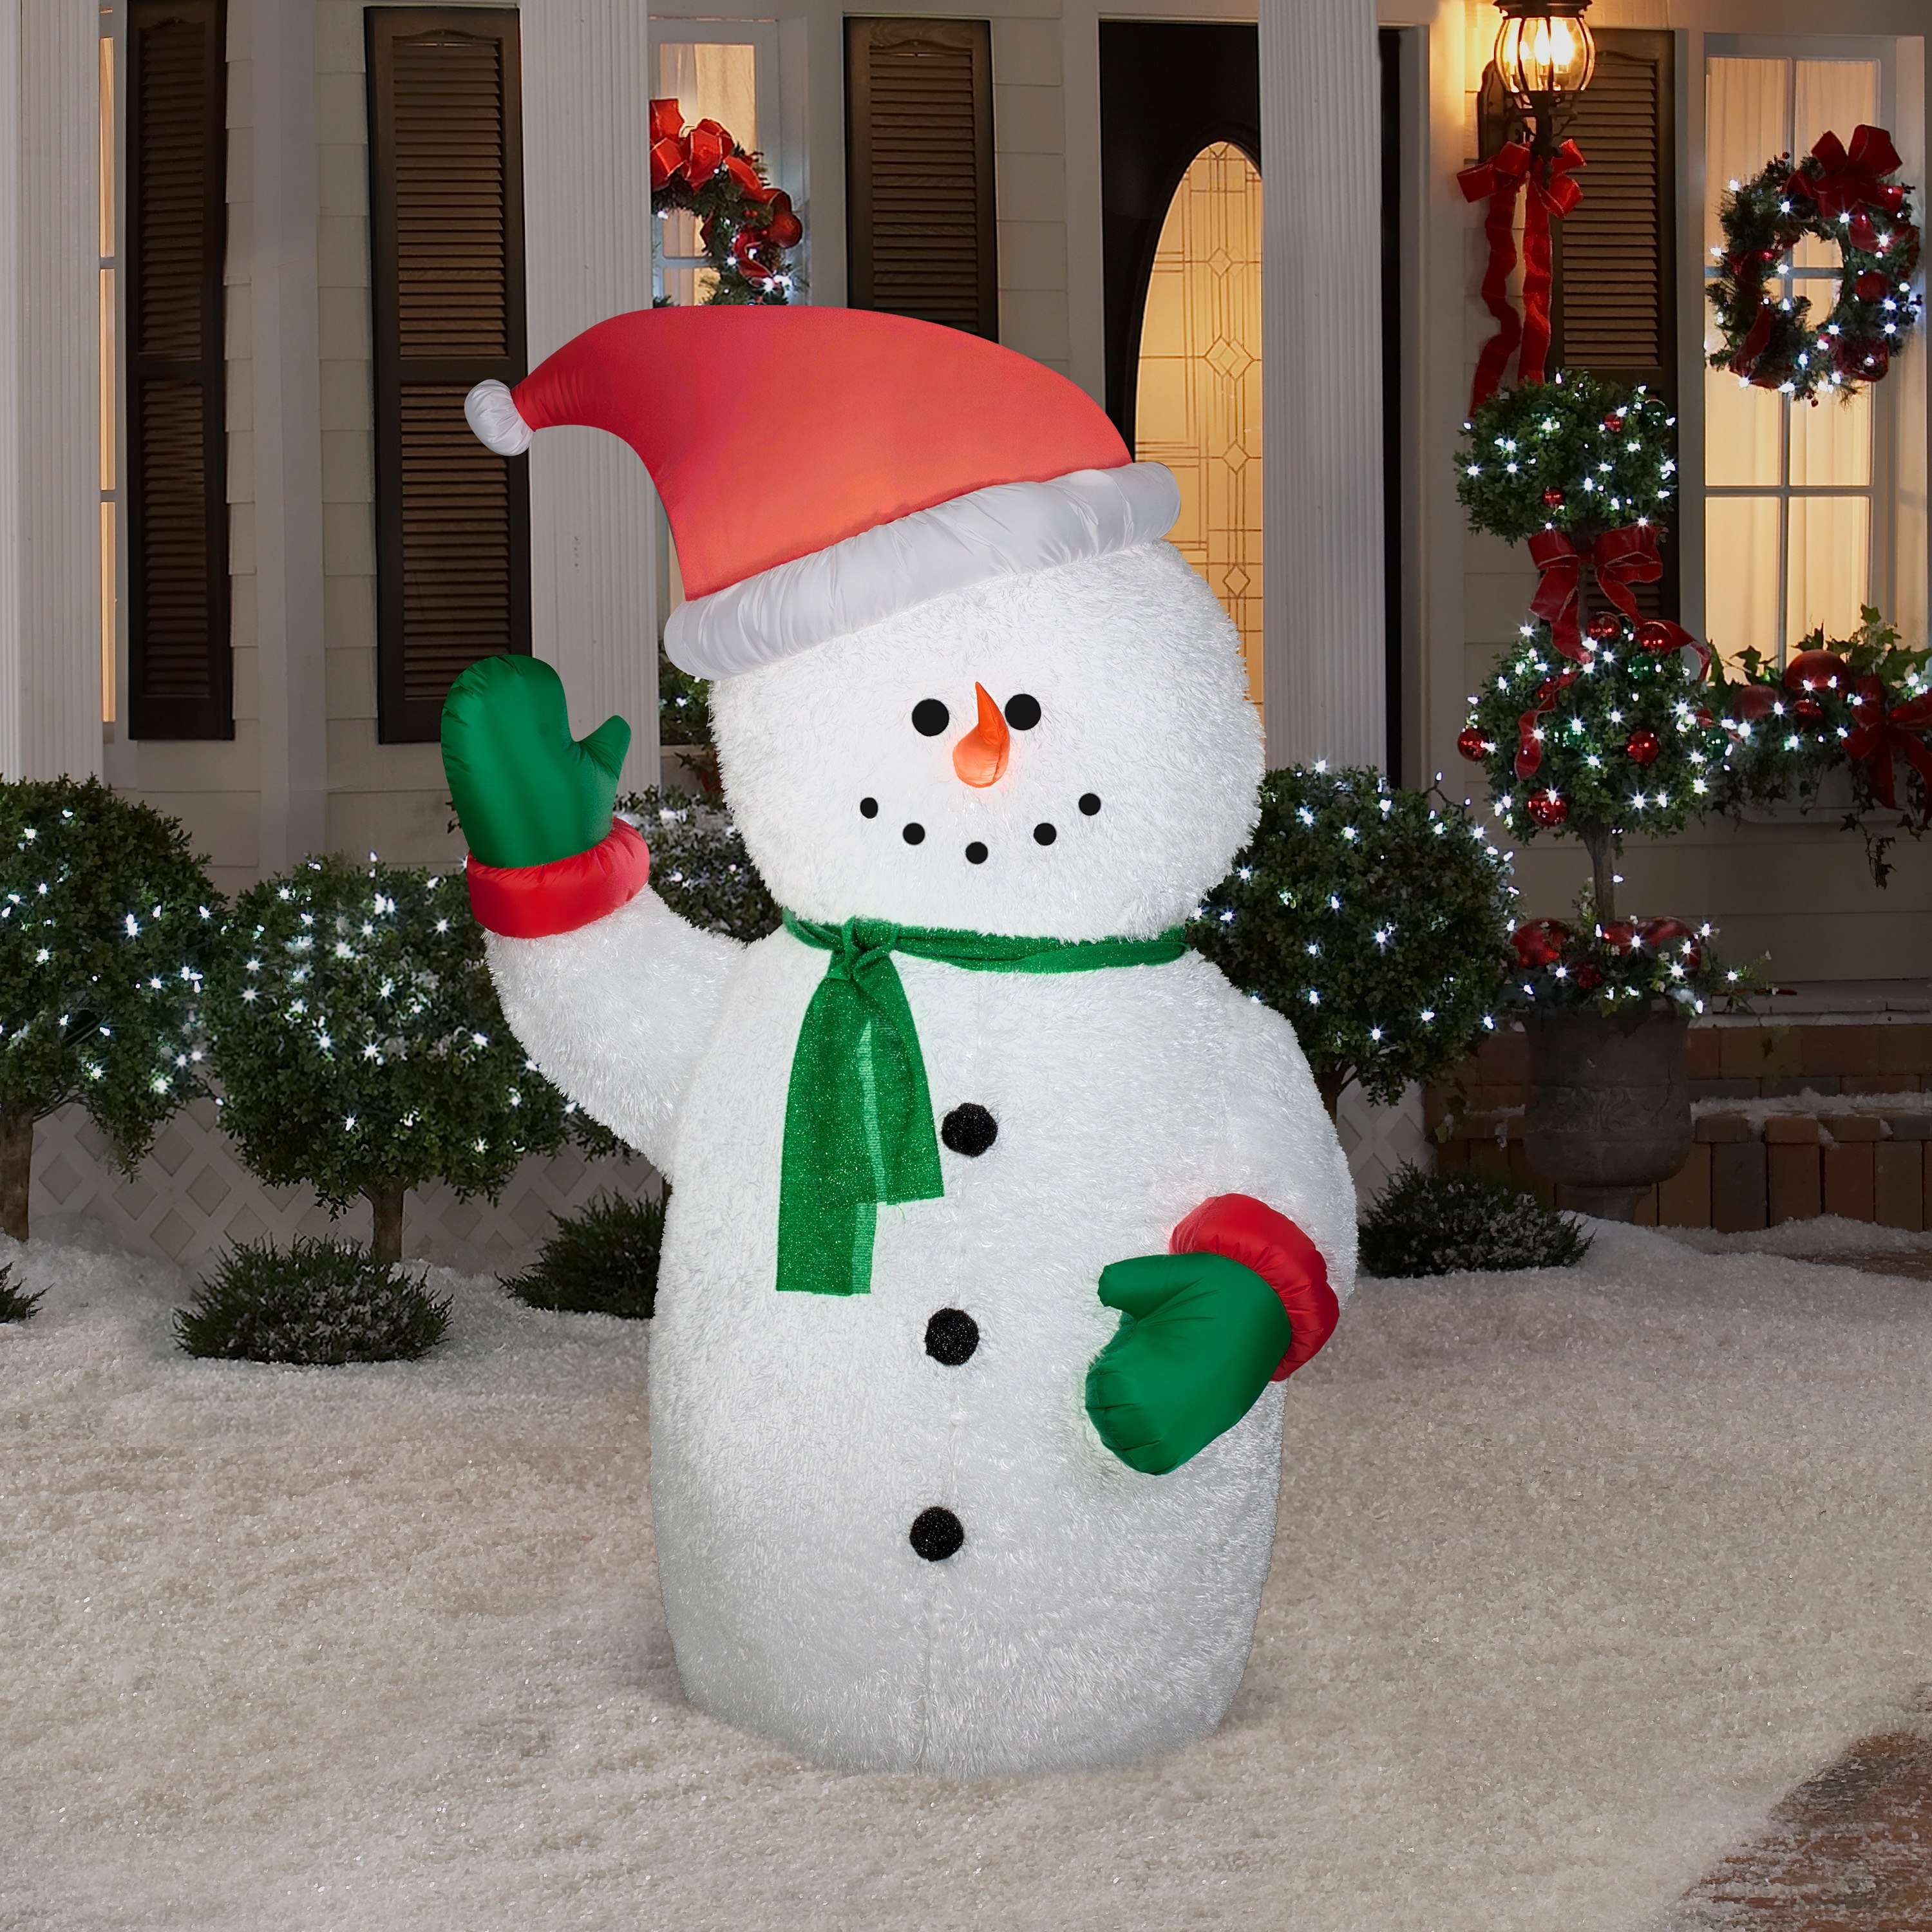 https://ak1.ostkcdn.com/images/products/is/images/direct/289345c159a0a0e2676b5731fd3a40a9ca60e22f/Gemmy-Christmas-Airblown-Inflatable-Mixed-Media-Snowman%2C-6-ft-Tall%2C-white.jpg